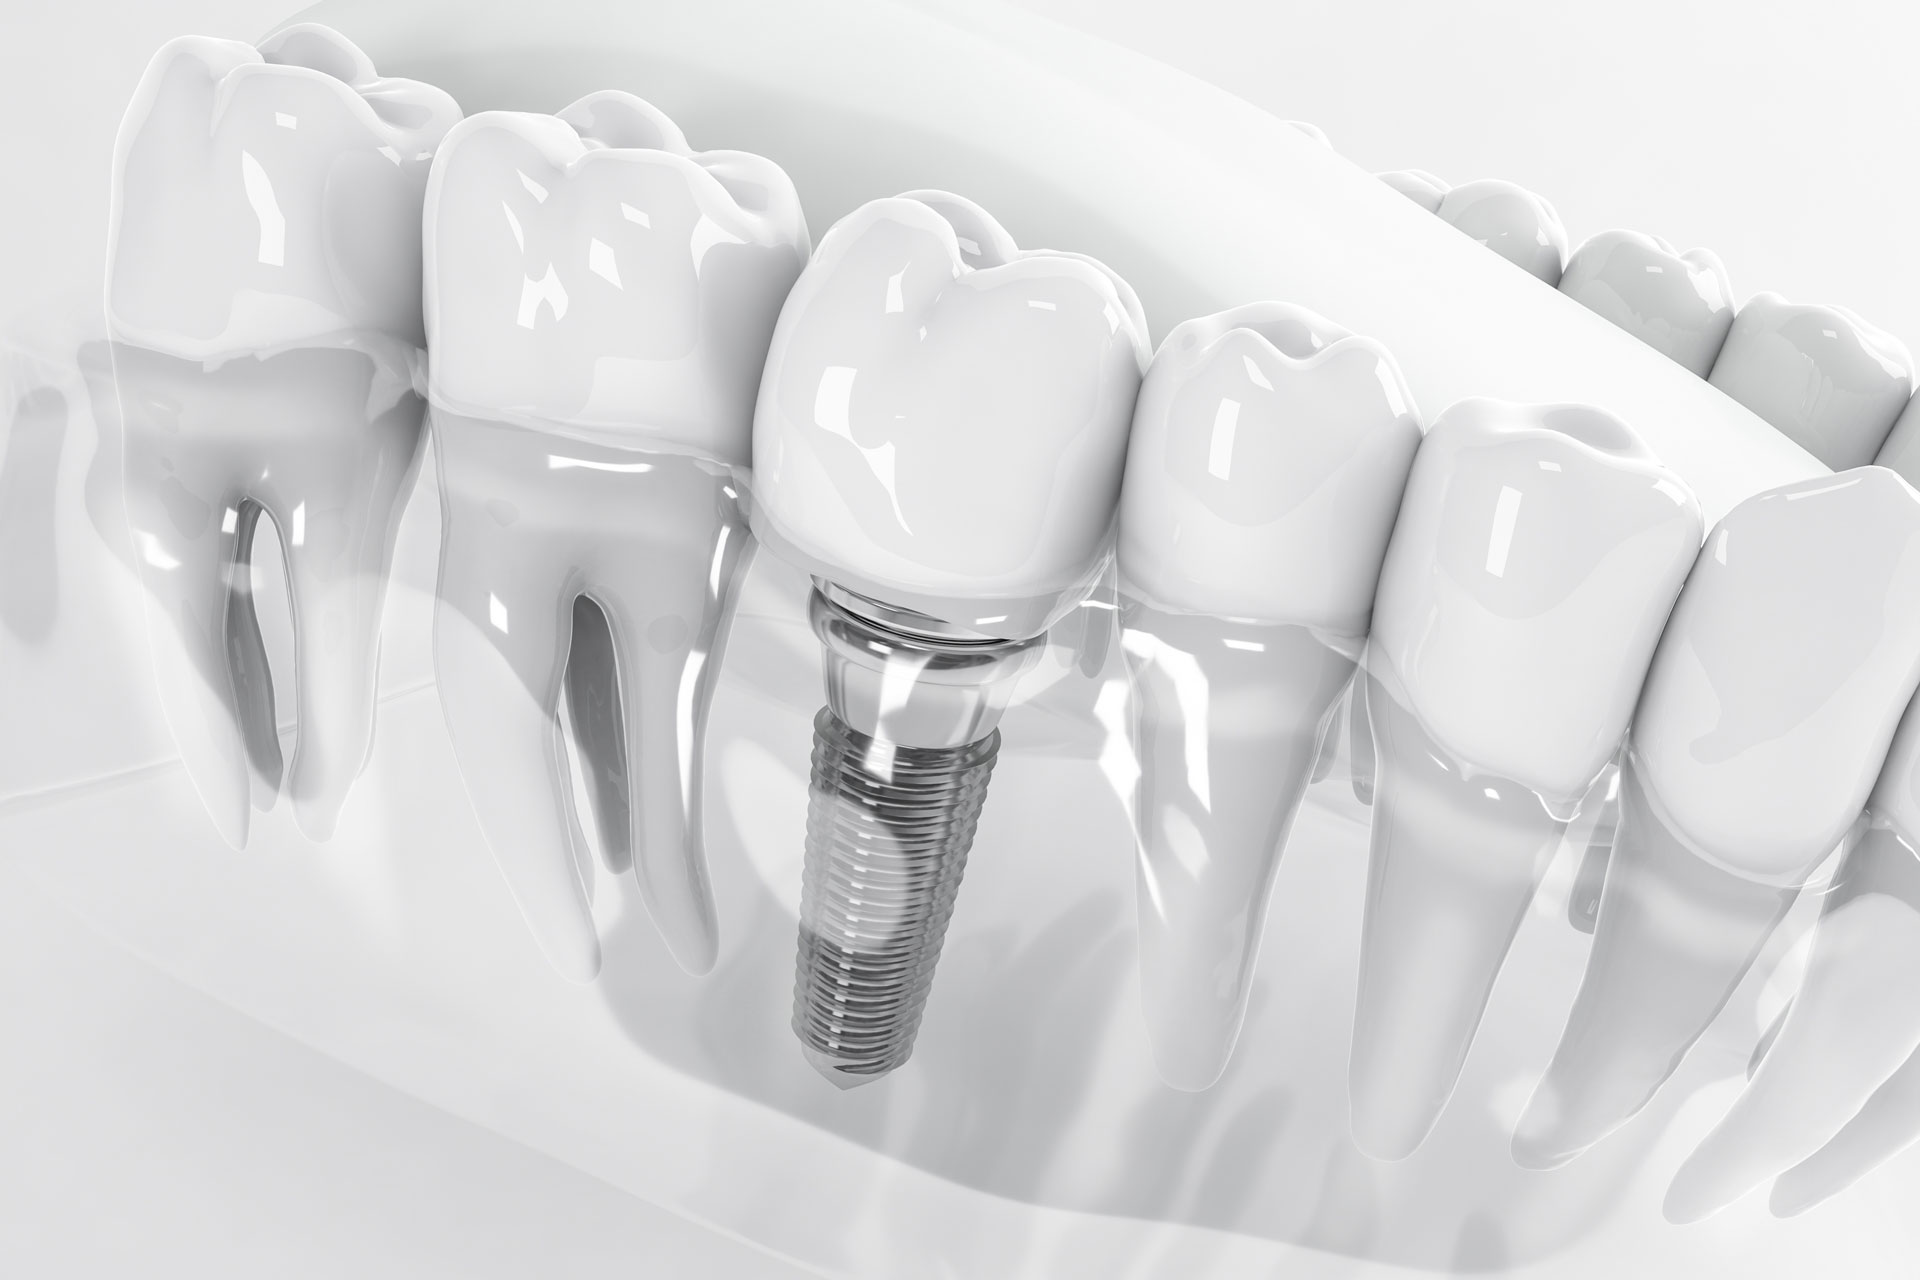 Are there alternatives to tooth implants?